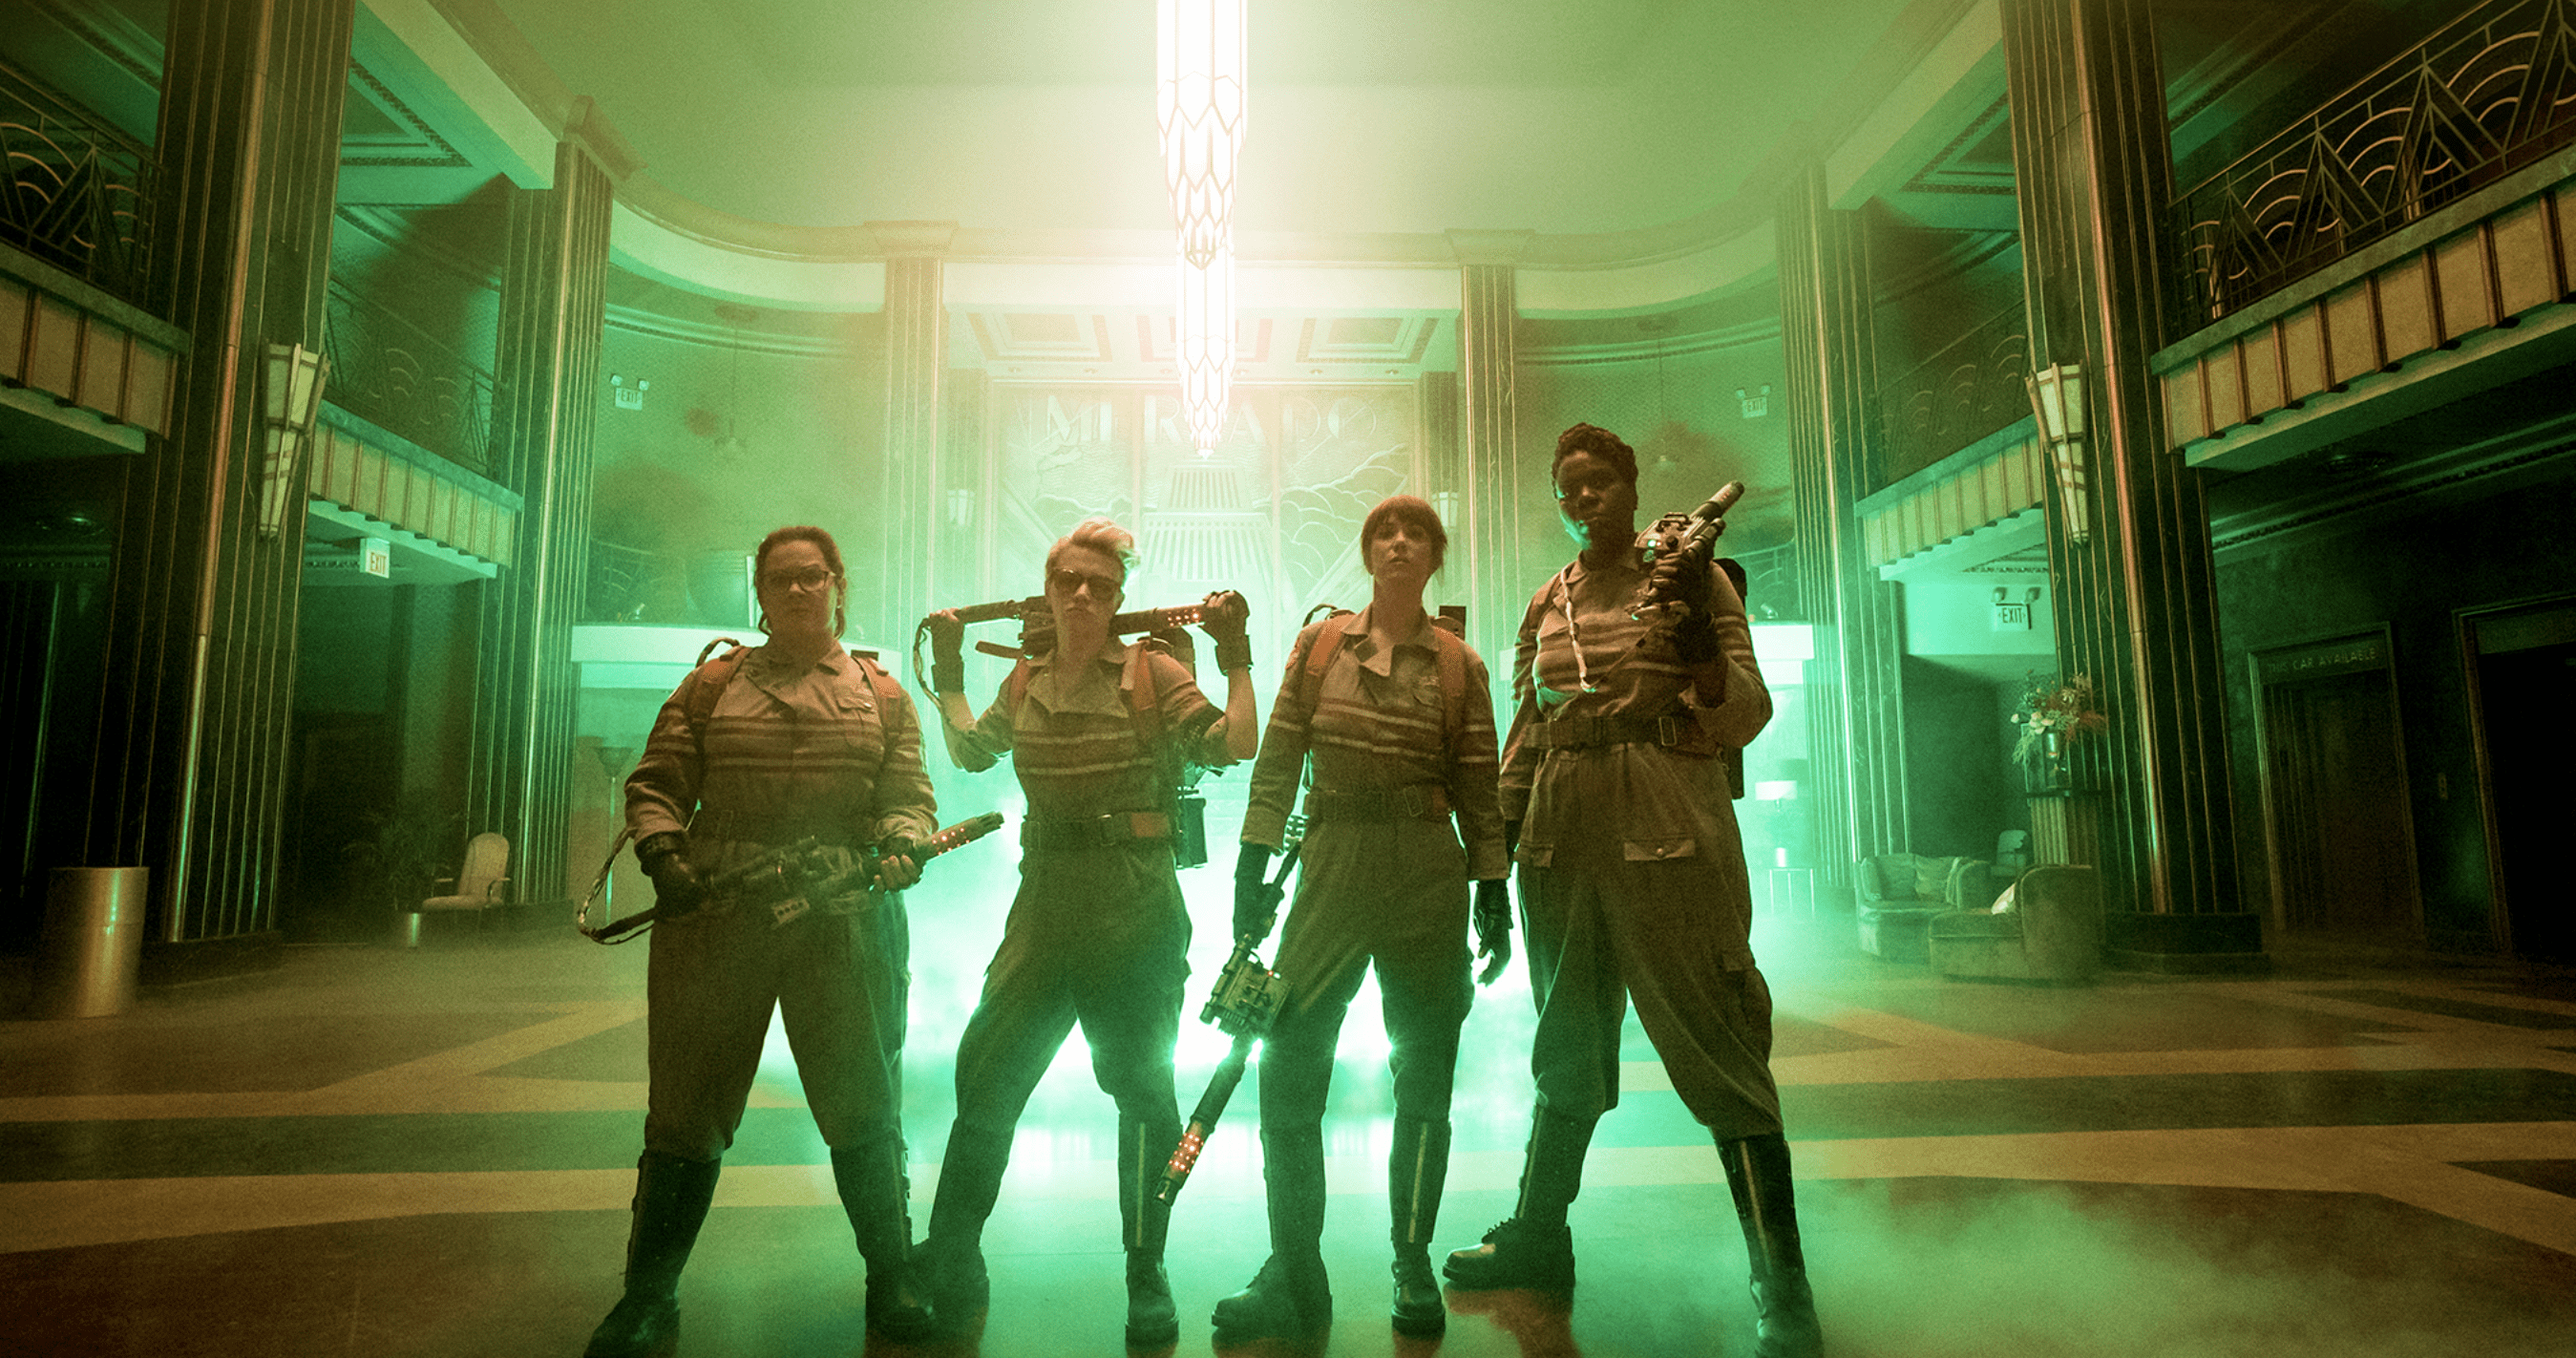 The main characters of the movie Ghostbusters pose in their costumes.